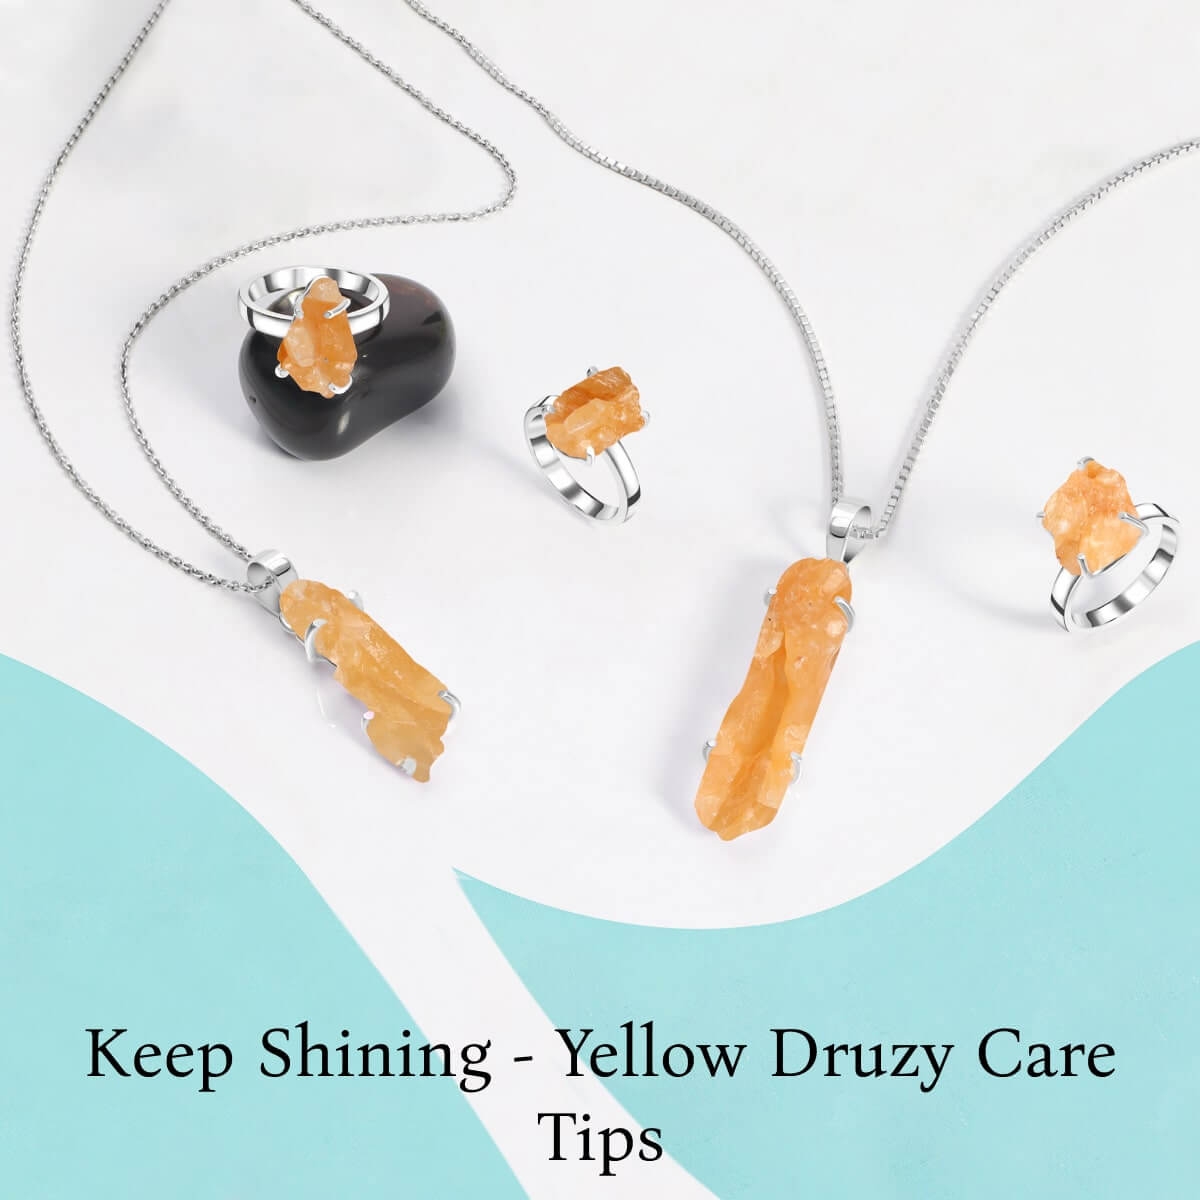 How to Care and Maintain Your Yellow Druzy Jewelry